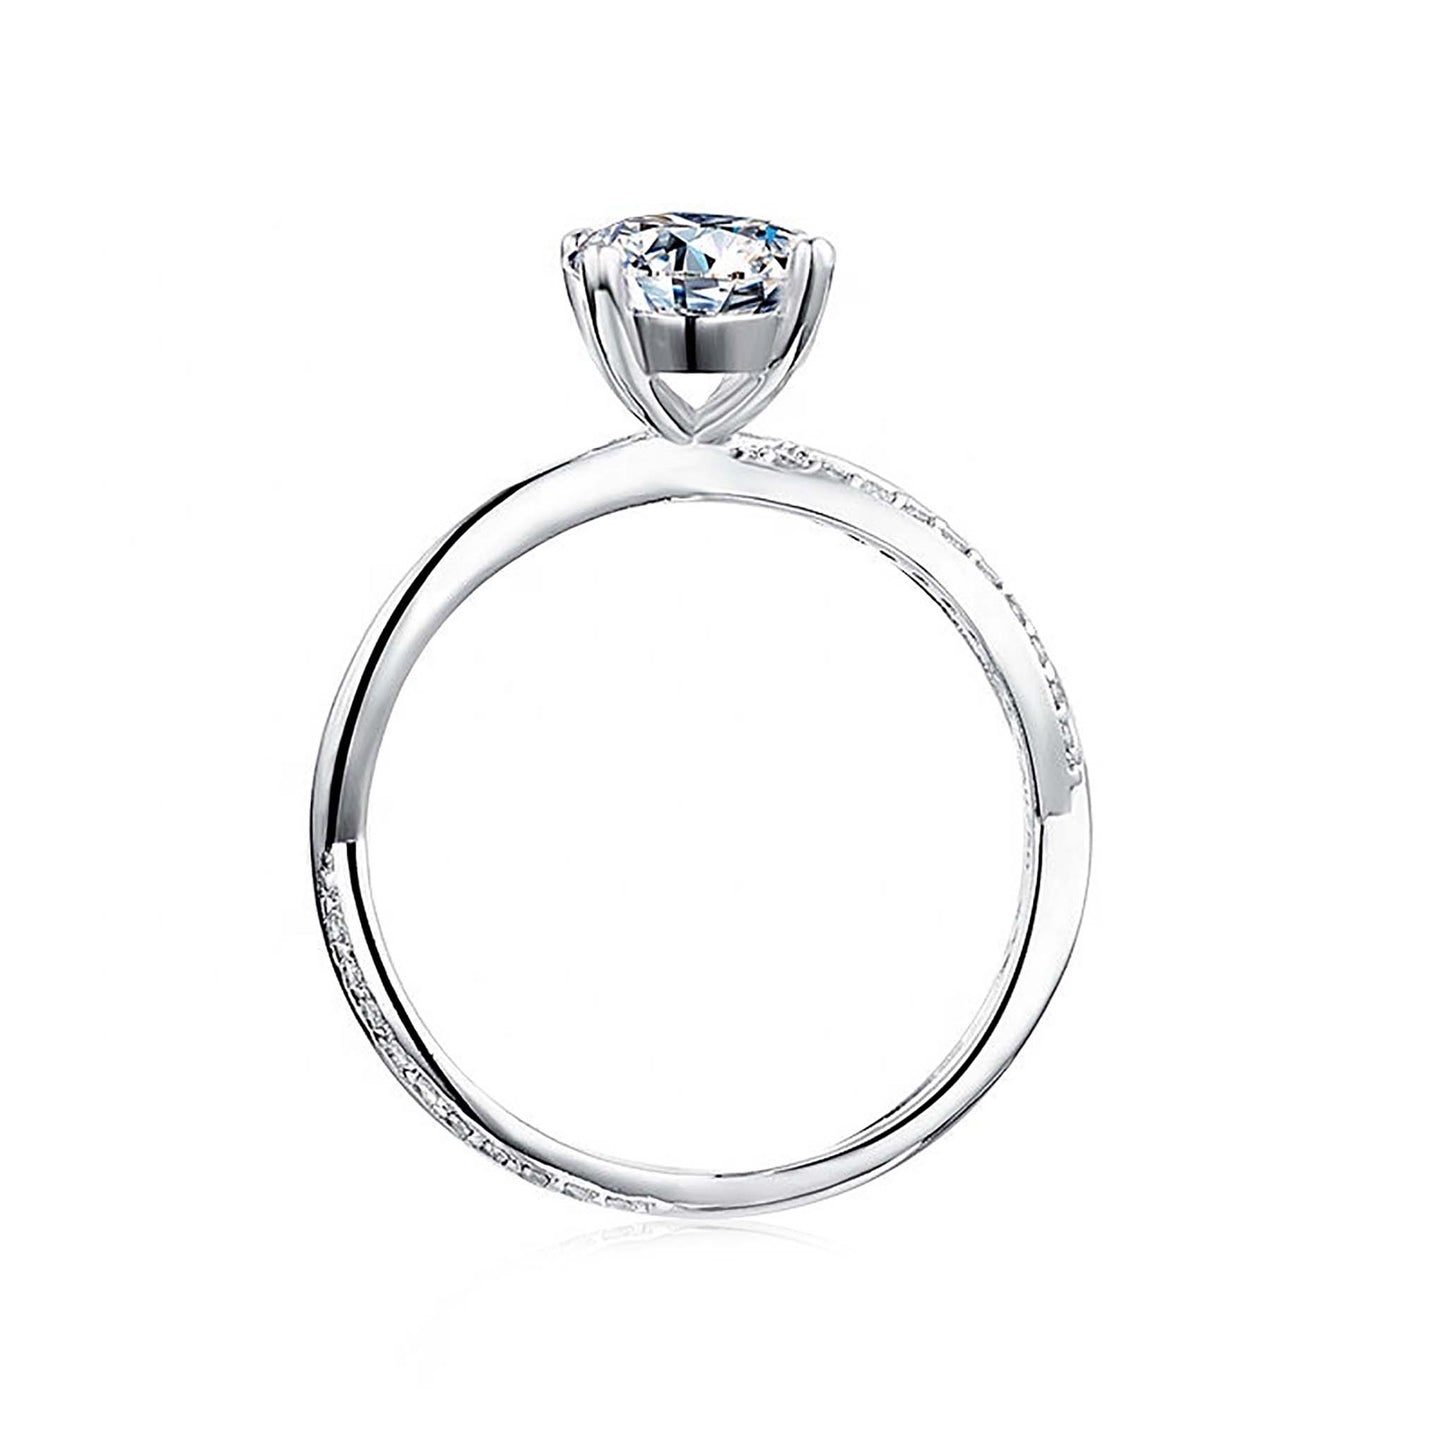 Side view of our 1.00 carat moissanite engagement ring in silver. Stunning view